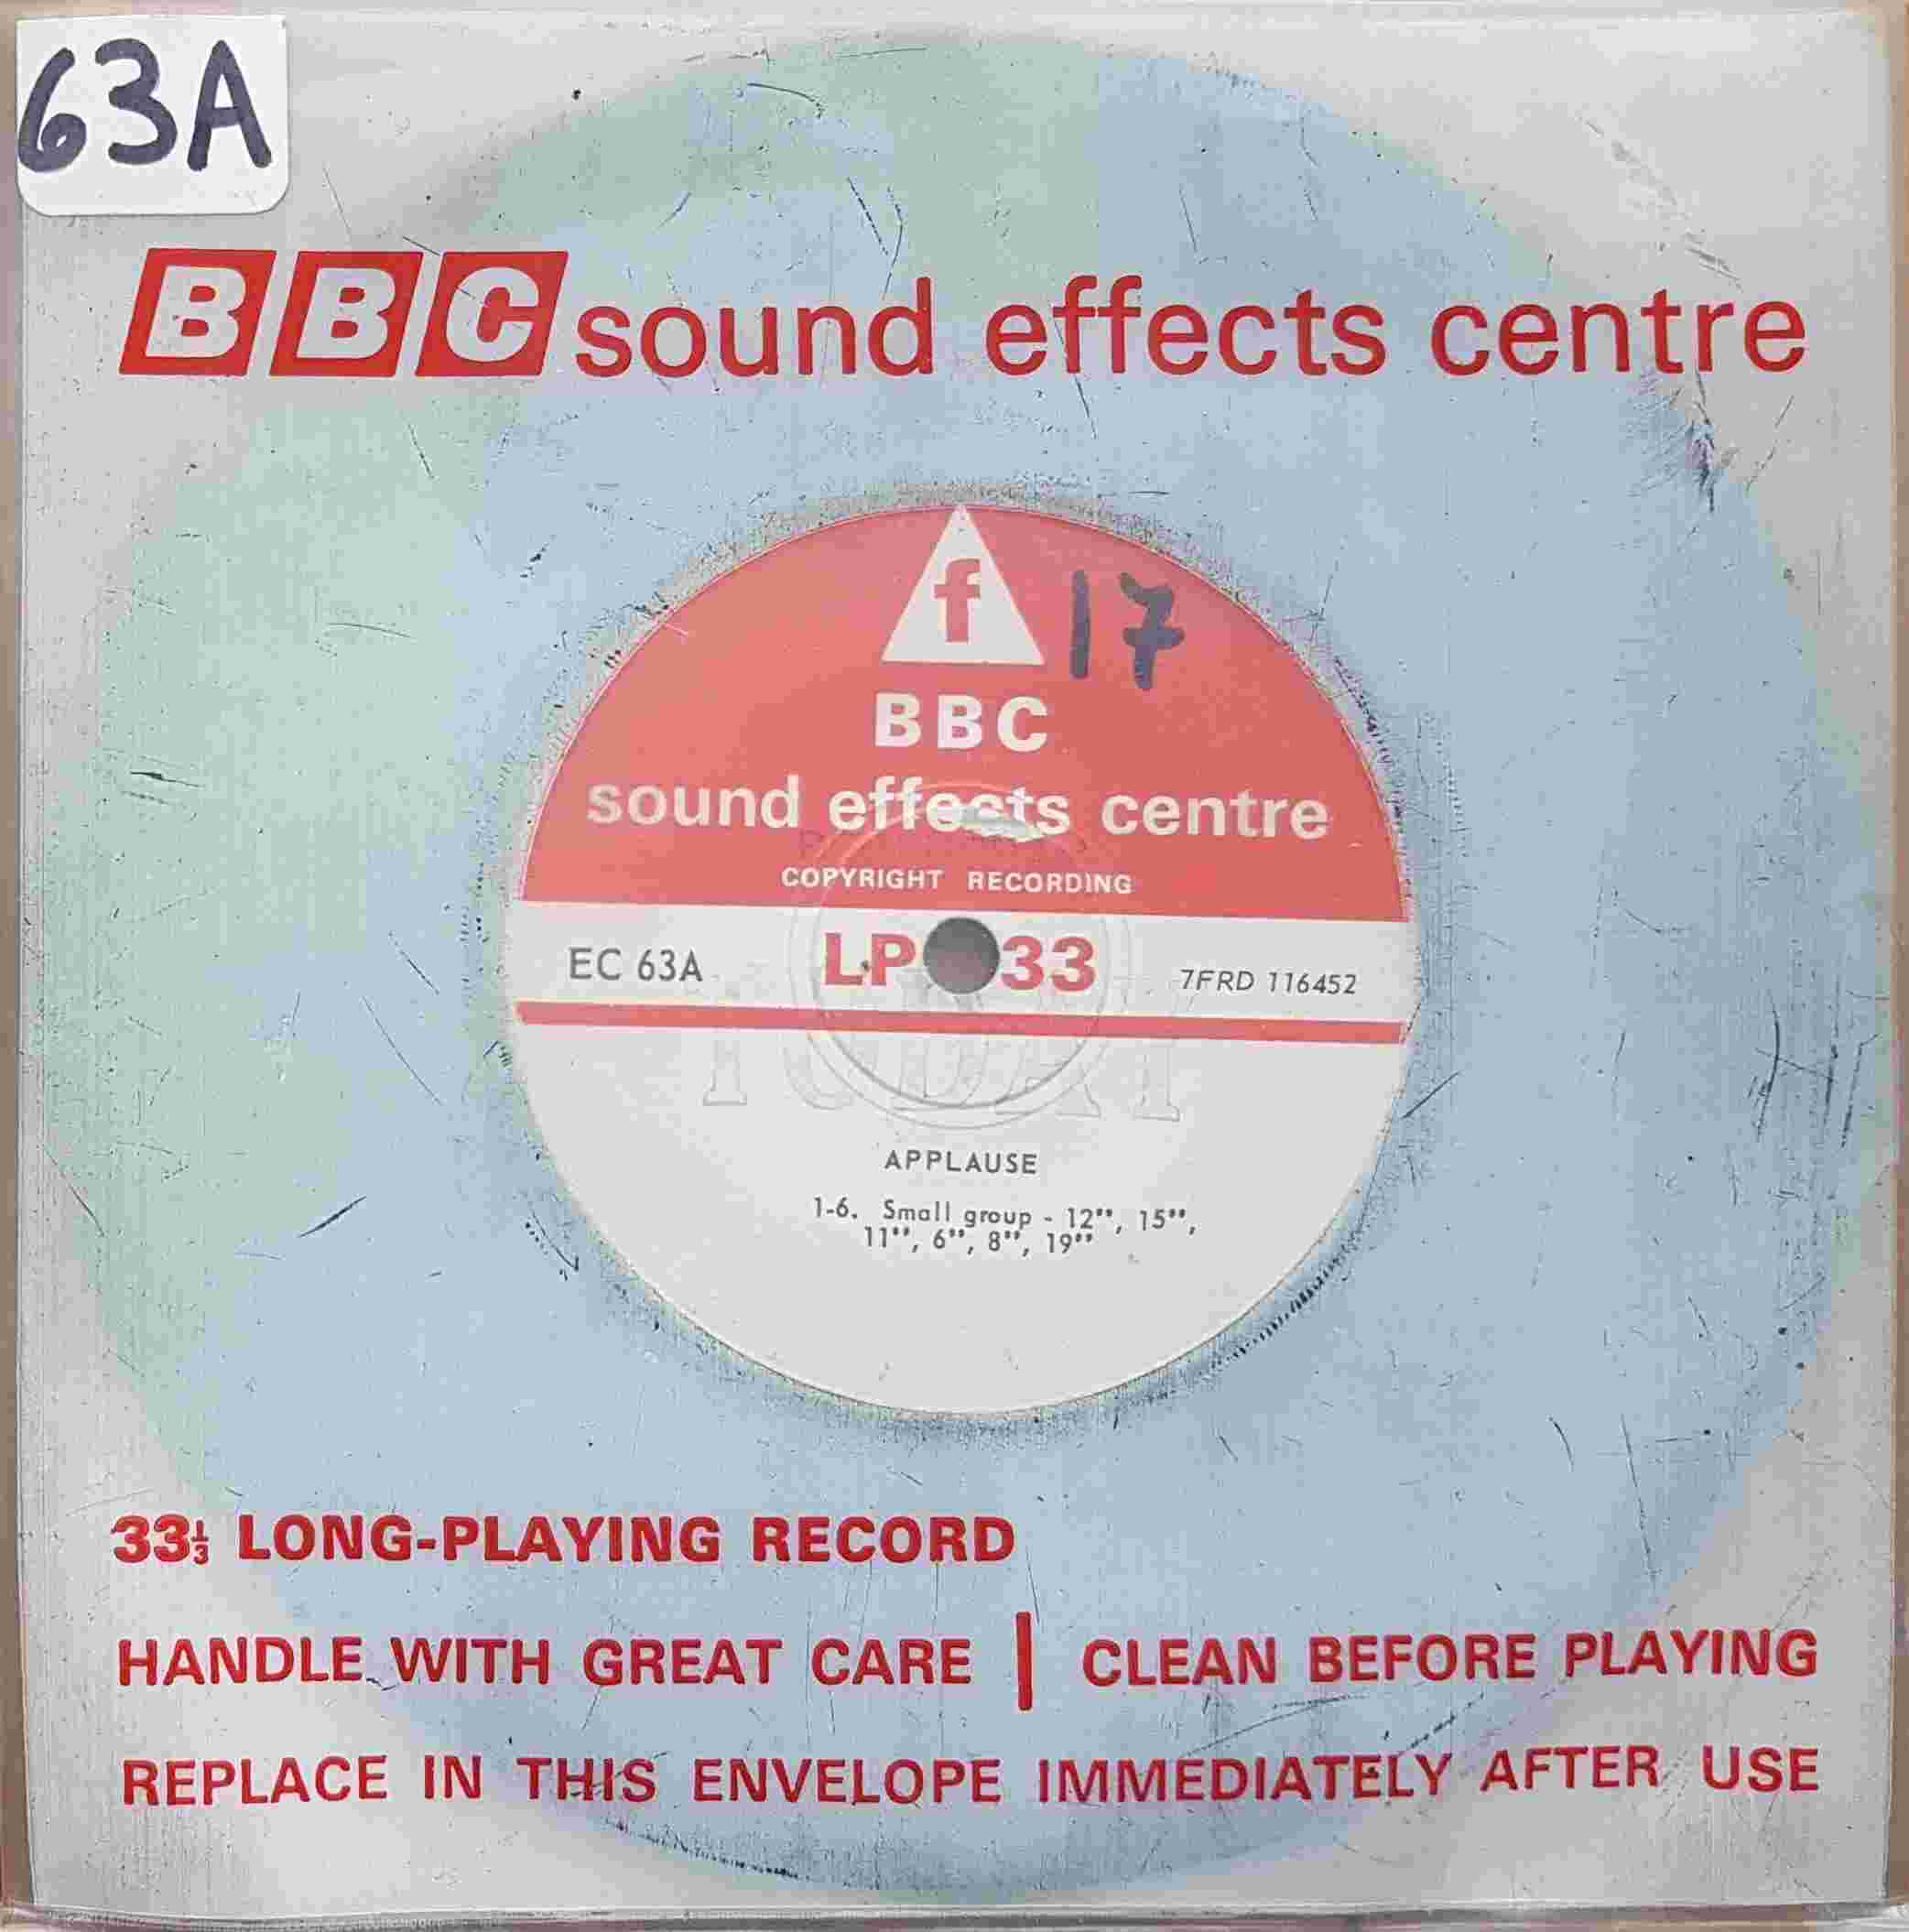 Picture of EC 63A Applause by artist Not registered from the BBC singles - Records and Tapes library